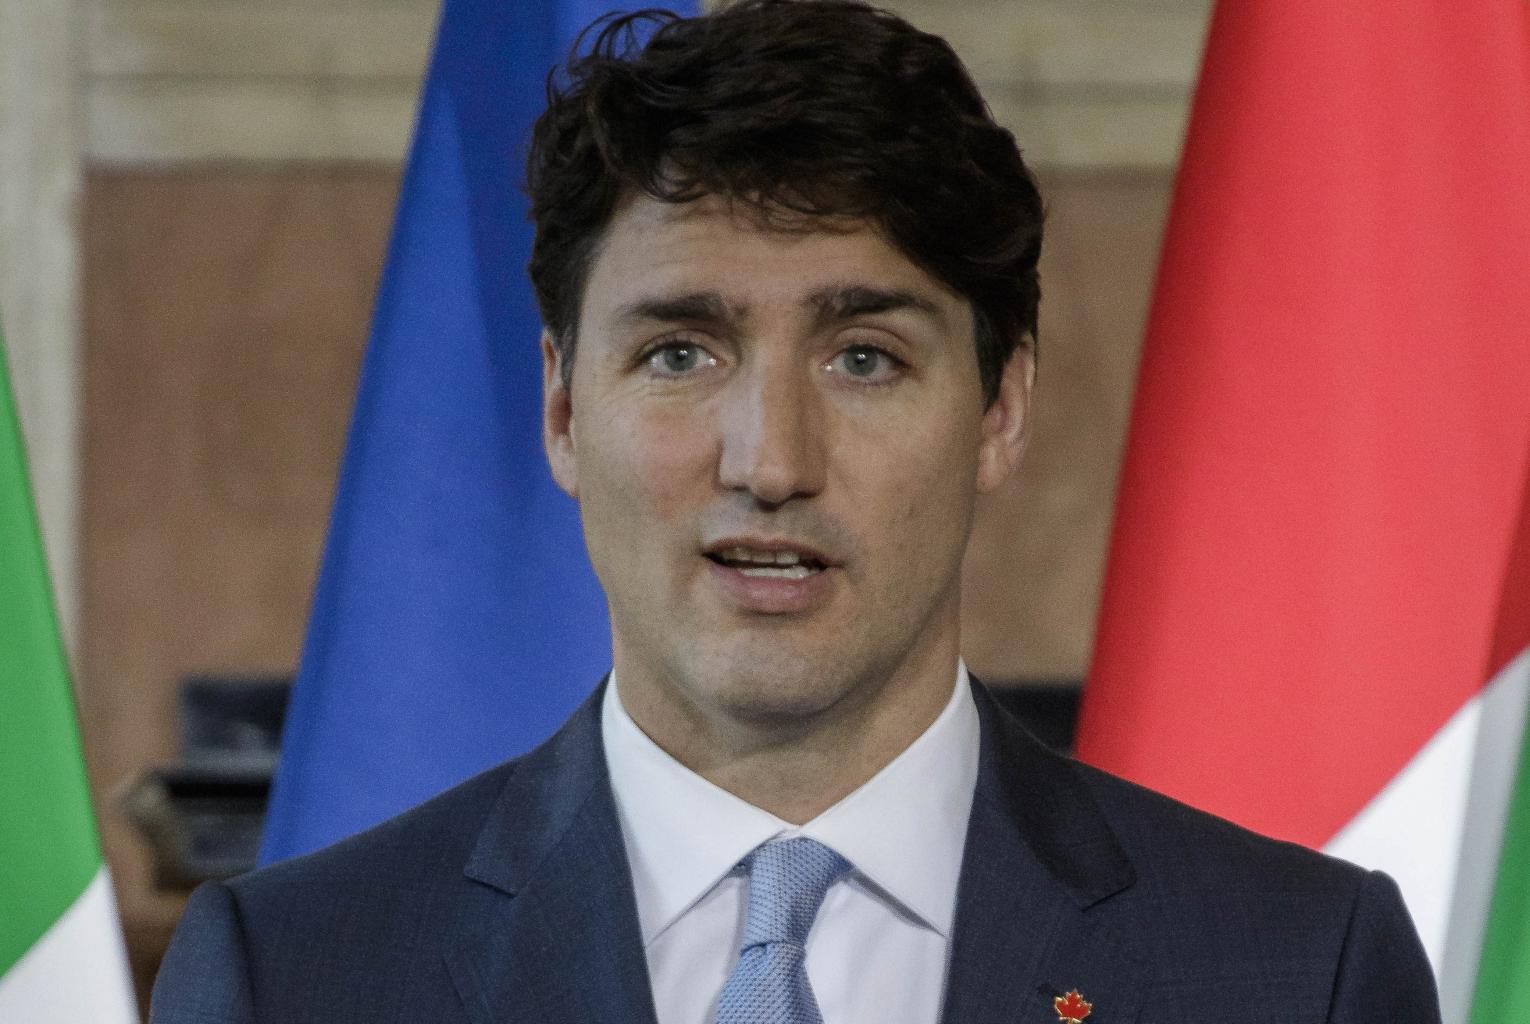 Justin Trudeau To Attend Global Citizen Festival Before G20 Summit, Featuring Coldplay, Shakira, Pharrell And More